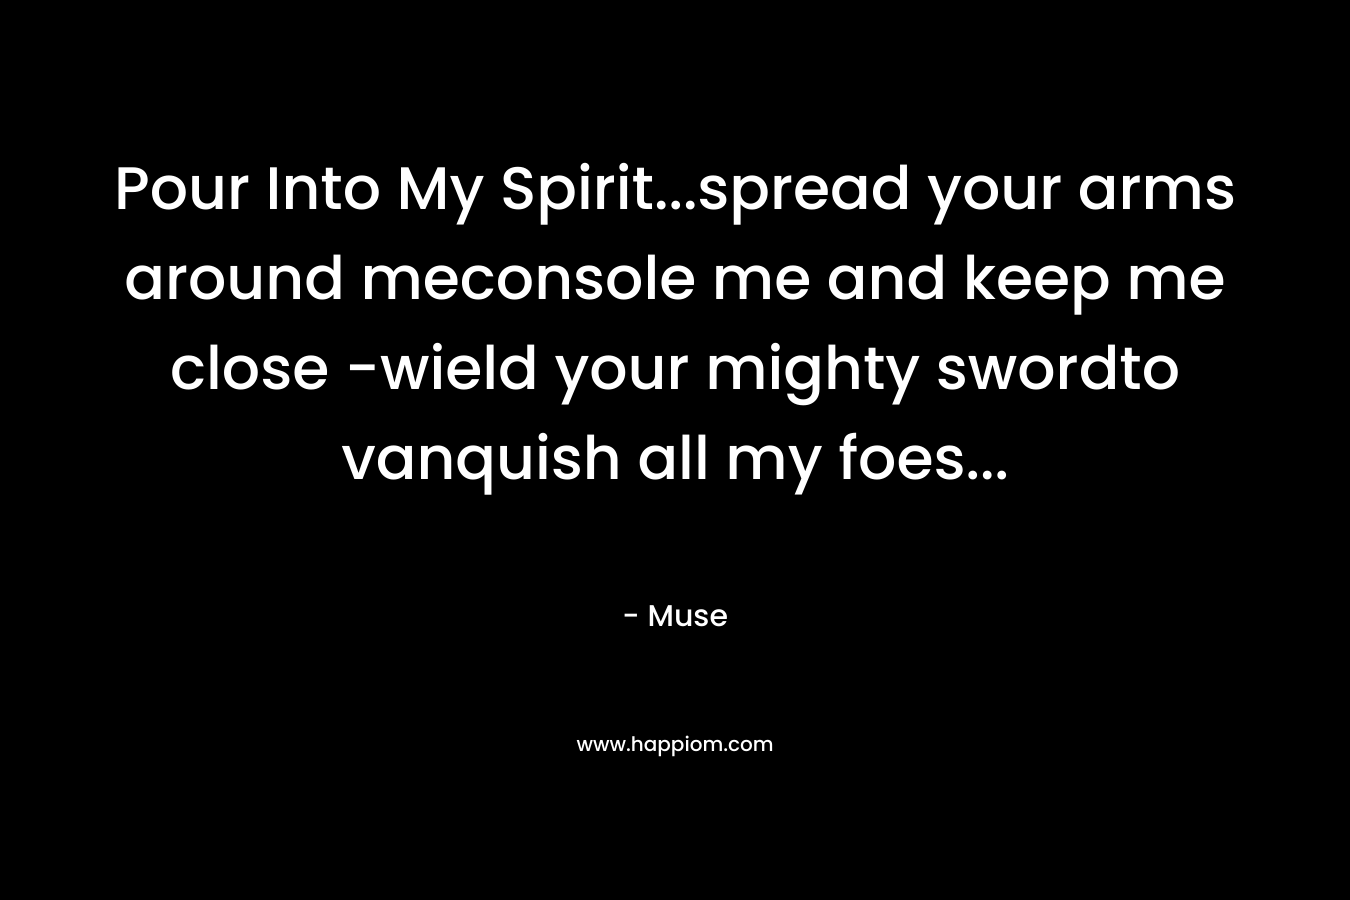 Pour Into My Spirit…spread your arms around meconsole me and keep me close -wield your mighty swordto vanquish all my foes… – Muse